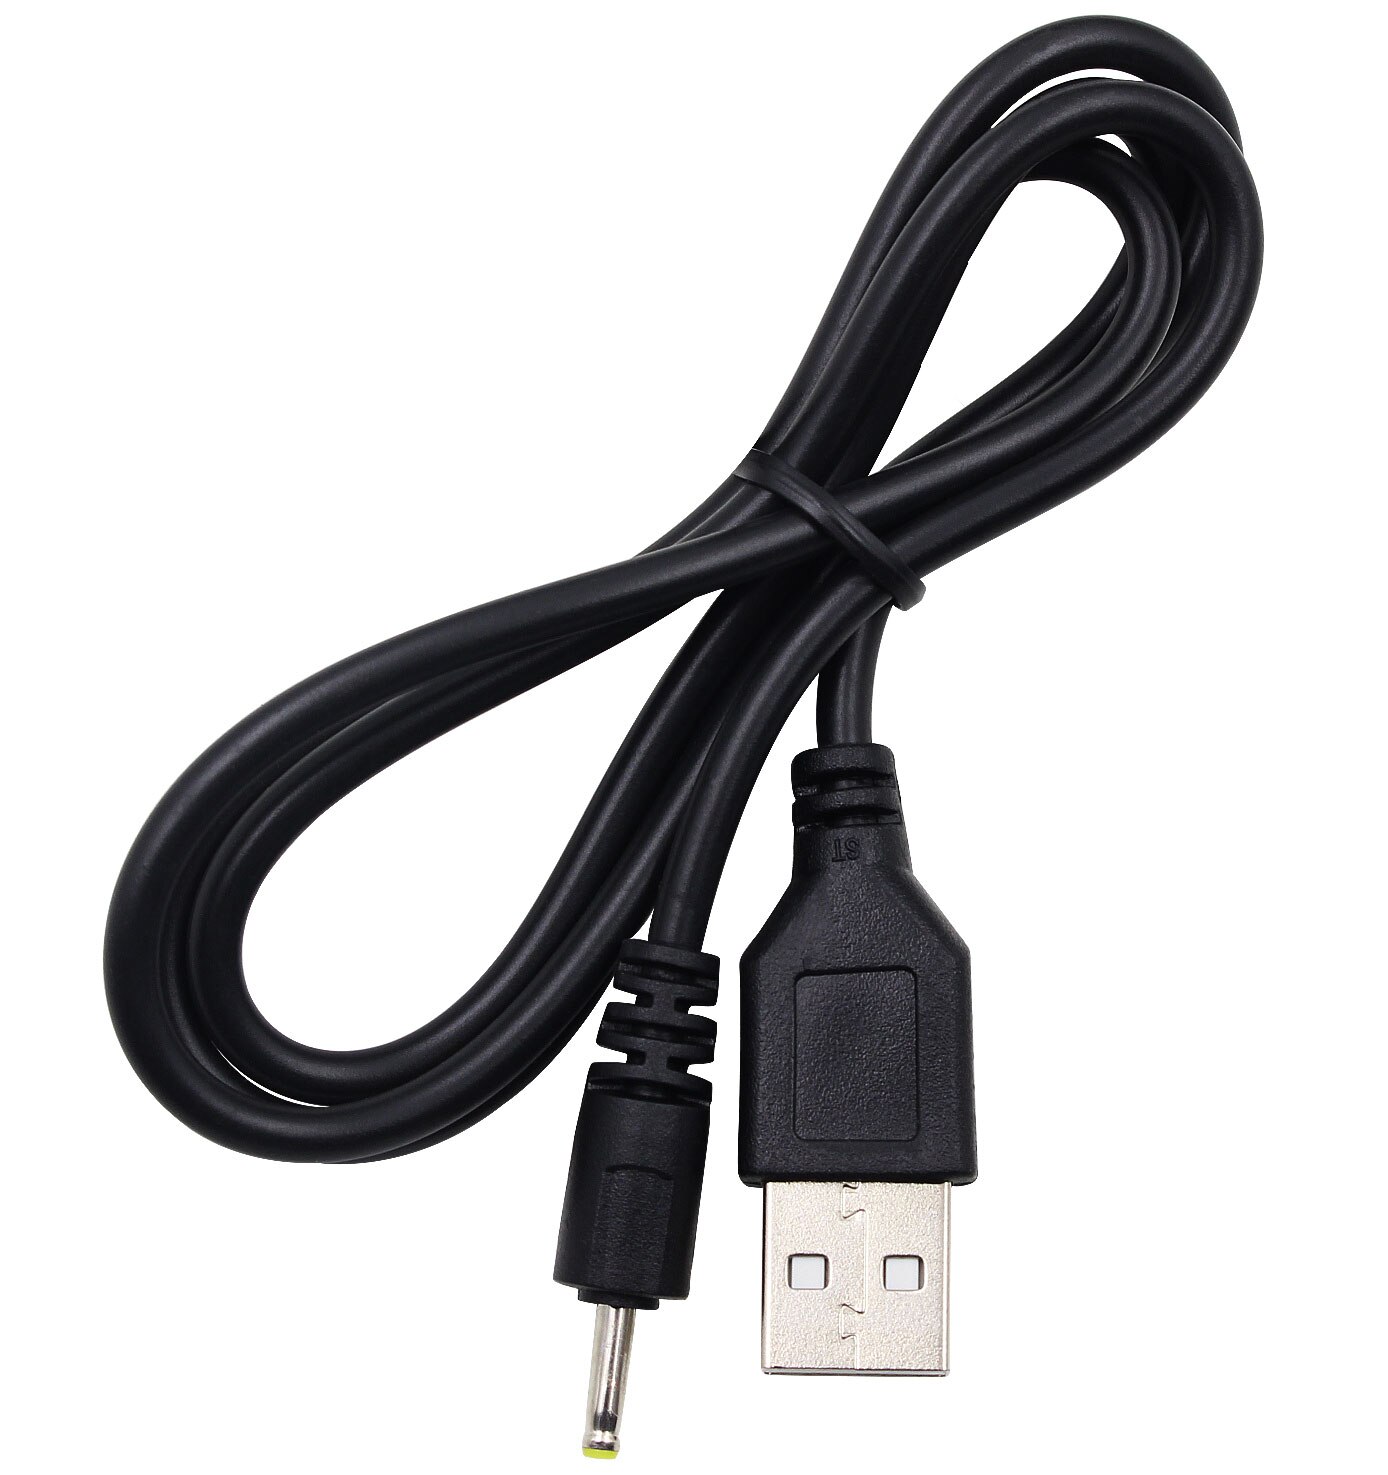 Usb Dc Power Charger Kabel Voor Digital2 7 "4Gb Android 4.1 Jelly Bean Tablet